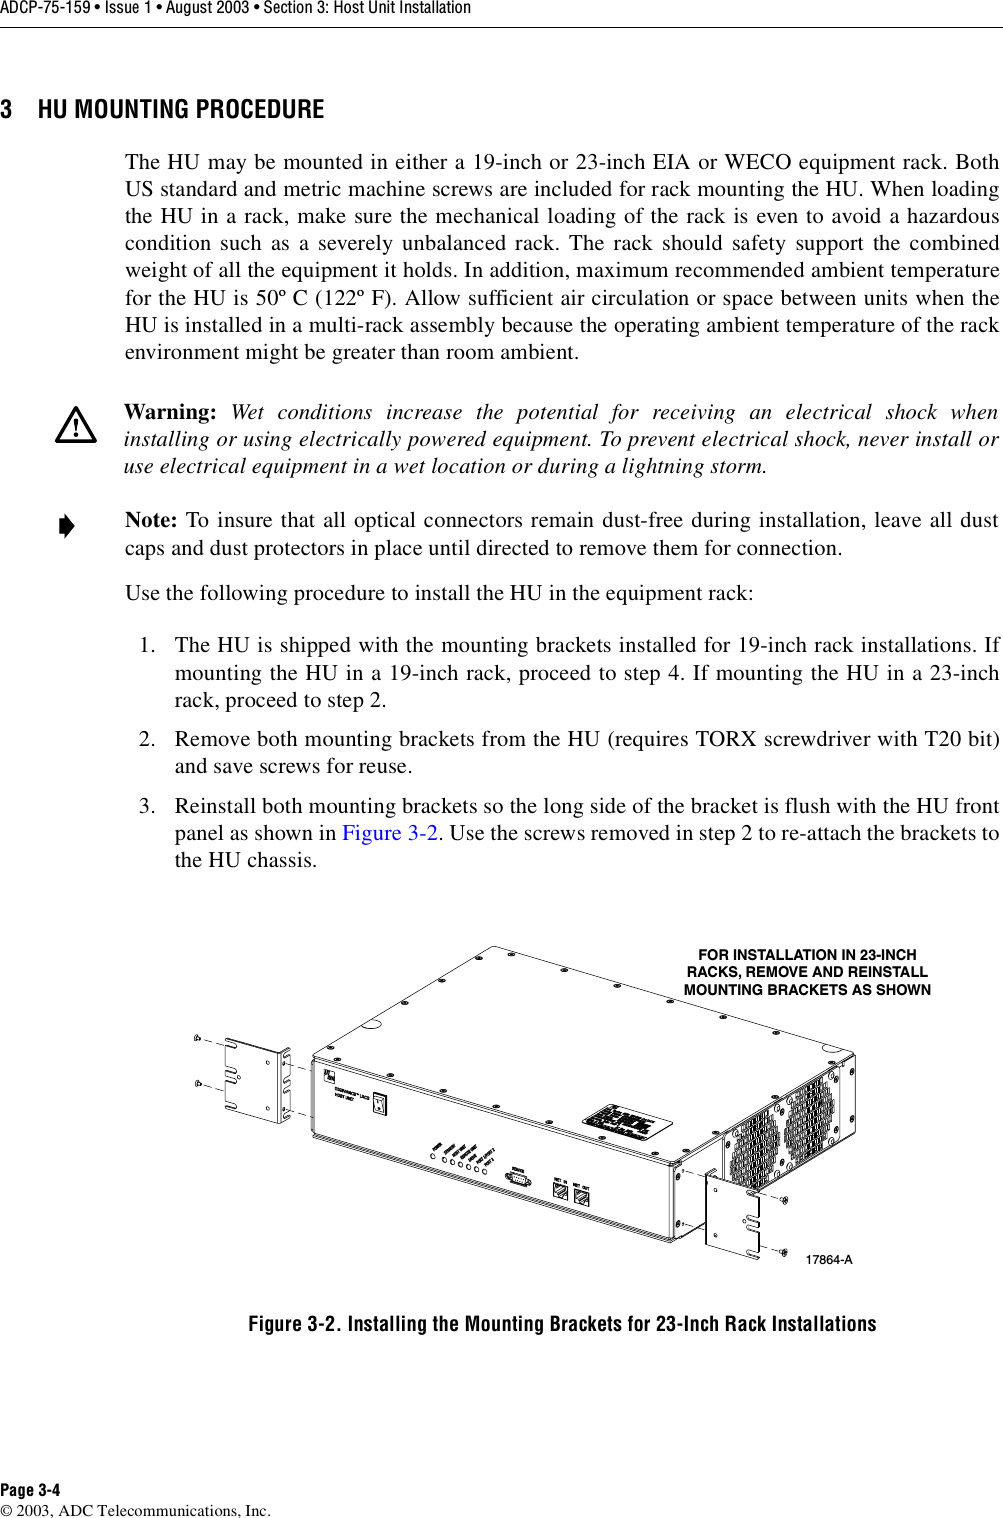 ADCP-75-159 • Issue 1 • August 2003 • Section 3: Host Unit InstallationPage 3-4© 2003, ADC Telecommunications, Inc.3 HU MOUNTING PROCEDUREThe HU may be mounted in either a 19-inch or 23-inch EIA or WECO equipment rack. BothUS standard and metric machine screws are included for rack mounting the HU. When loadingthe HU in a rack, make sure the mechanical loading of the rack is even to avoid a hazardouscondition such as a severely unbalanced rack. The rack should safety support the combinedweight of all the equipment it holds. In addition, maximum recommended ambient temperaturefor the HU is 50º C (122º F). Allow sufficient air circulation or space between units when theHU is installed in a multi-rack assembly because the operating ambient temperature of the rackenvironment might be greater than room ambient. Use the following procedure to install the HU in the equipment rack:1. The HU is shipped with the mounting brackets installed for 19-inch rack installations. Ifmounting the HU in a 19-inch rack, proceed to step 4. If mounting the HU in a 23-inchrack, proceed to step 2. 2. Remove both mounting brackets from the HU (requires TORX screwdriver with T20 bit)and save screws for reuse. 3. Reinstall both mounting brackets so the long side of the bracket is flush with the HU frontpanel as shown in Figure 3-2. Use the screws removed in step 2 to re-attach the brackets tothe HU chassis. Figure 3-2. Installing the Mounting Brackets for 23-Inch Rack InstallationsWarning:  Wet conditions increase the potential for receiving an electrical shock wheninstalling or using electrically powered equipment. To prevent electrical shock, never install oruse electrical equipment in a wet location or during a lightning storm. Note: To insure that all optical connectors remain dust-free during installation, leave all dustcaps and dust protectors in place until directed to remove them for connection. 17864-AFOR INSTALLATION IN 23-INCHRACKS, REMOVE AND REINSTALLMOUNTING BRACKETS AS SHOWN